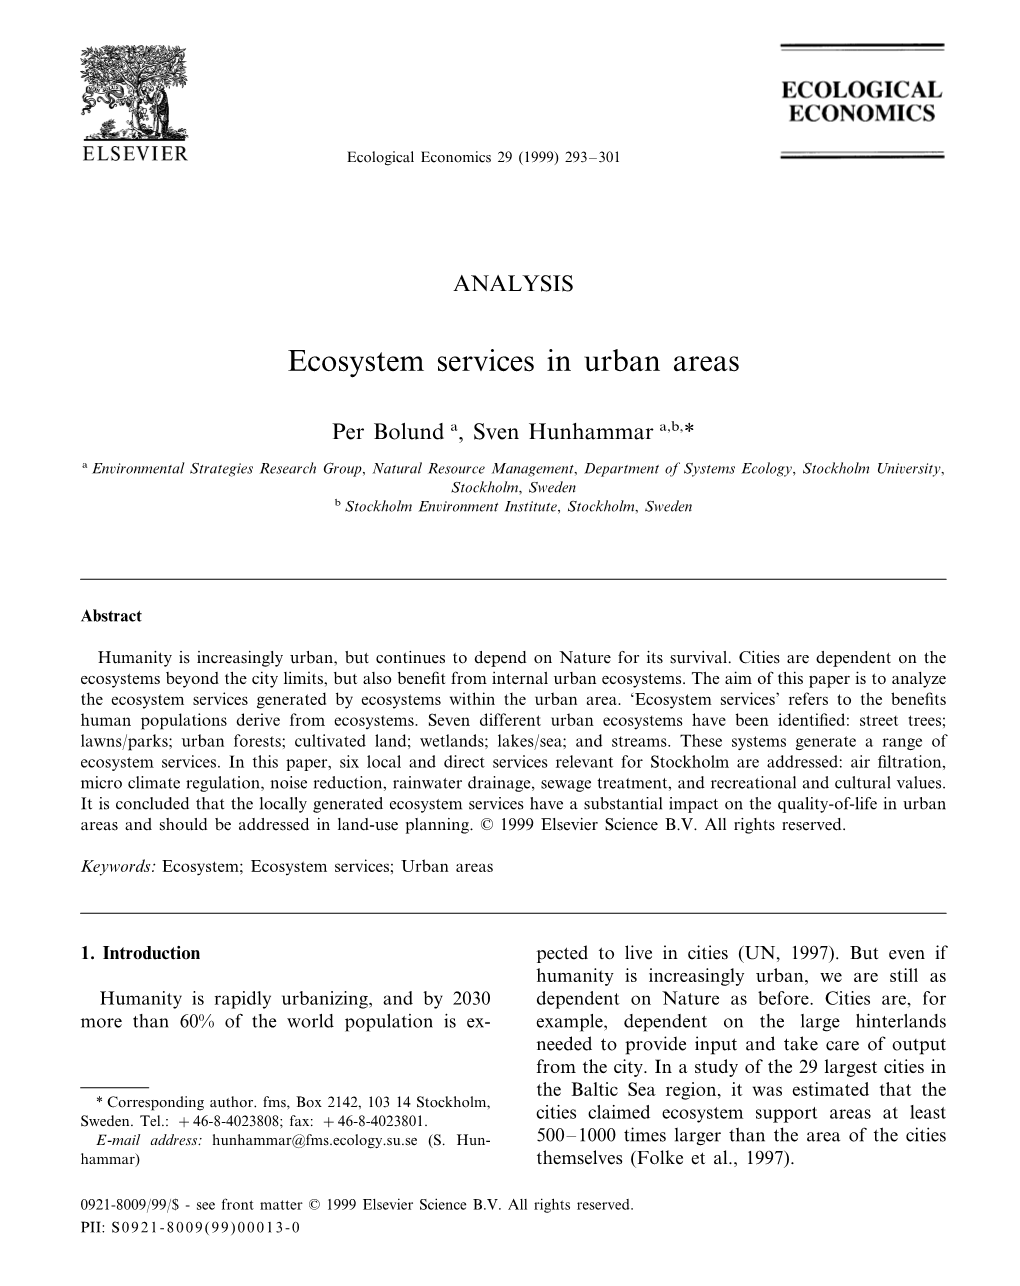 Ecosystem Services in Urban Areas